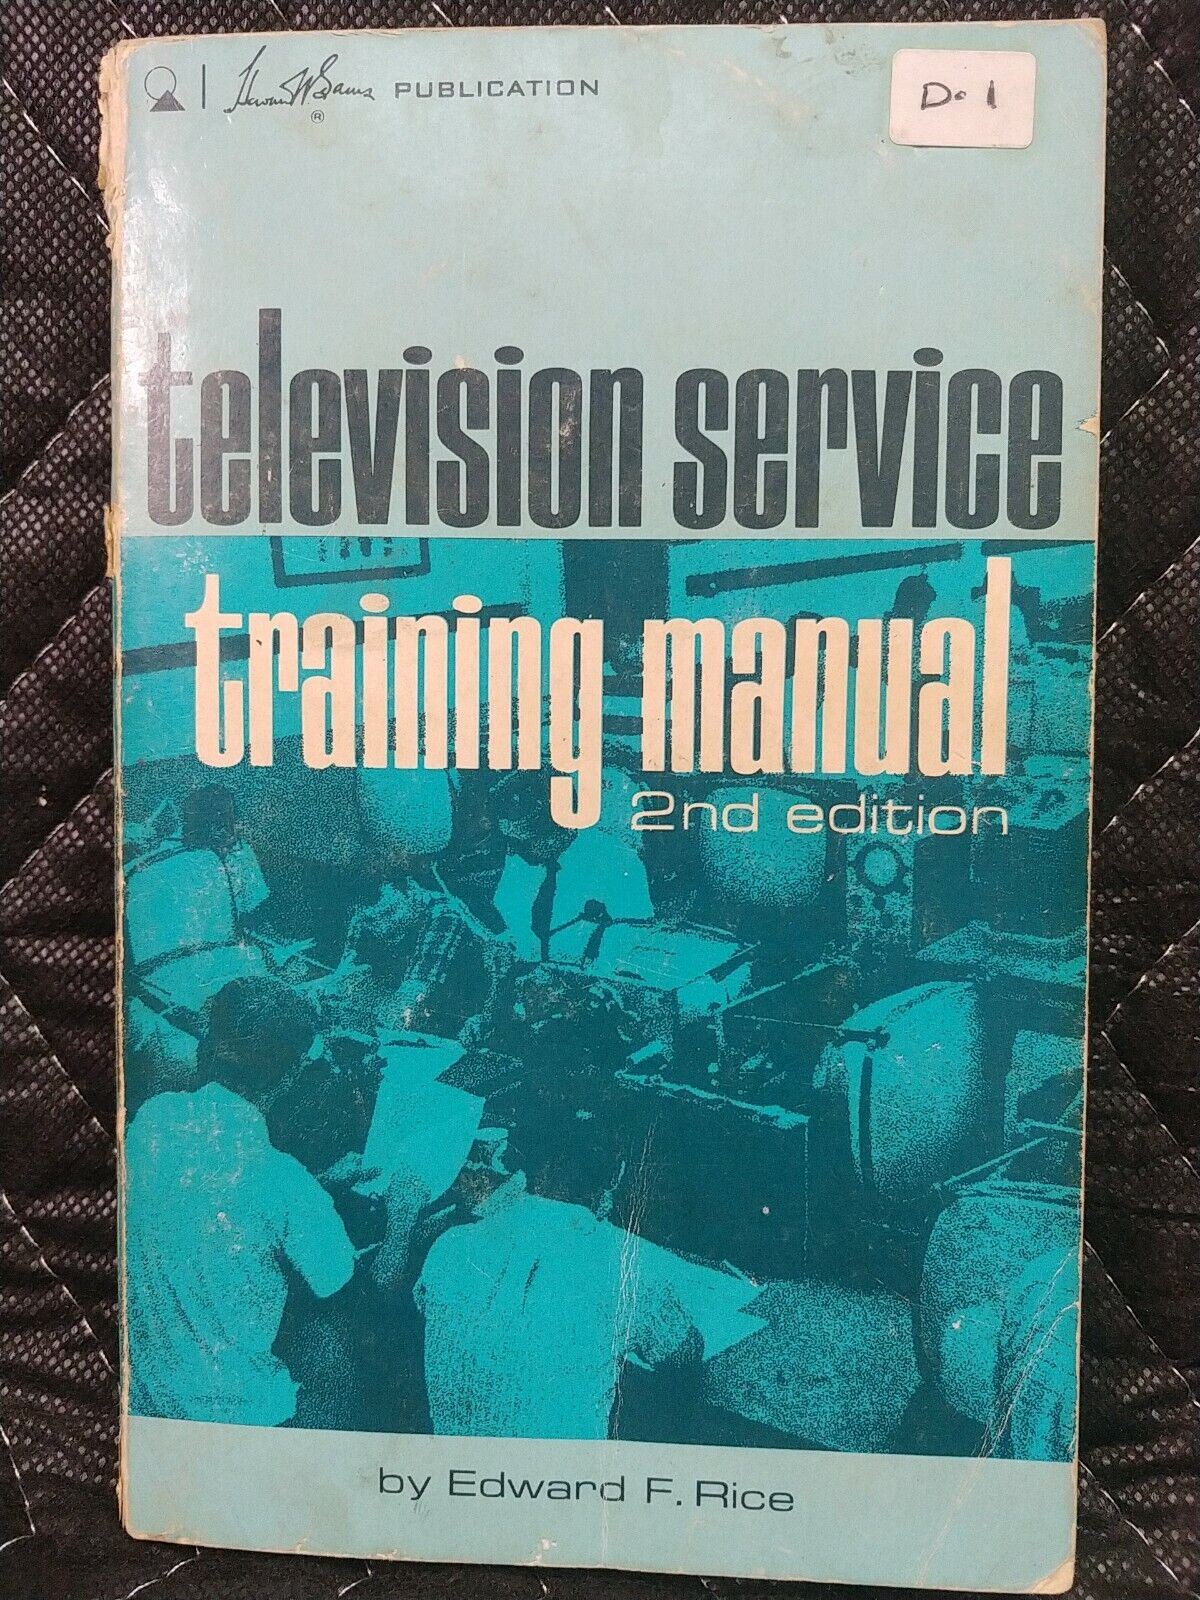 Television Service Training Manual 2nd edition 1968 Paperback Edward F. Rice